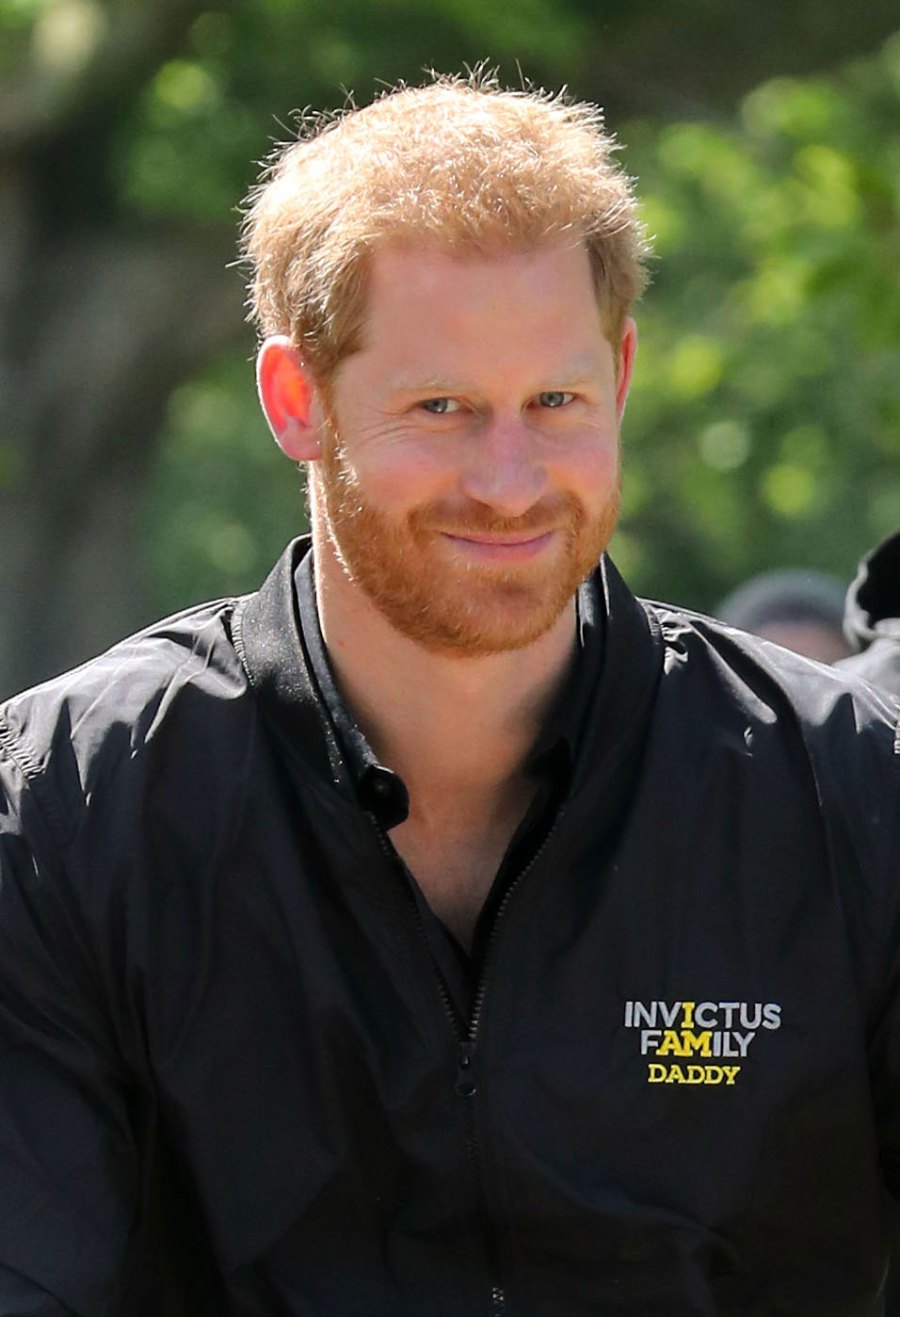 Prince Harry Gets a Gift for Baby Archie During Solo Day Trip to the Netherlands Dad Jacket Invictus Games